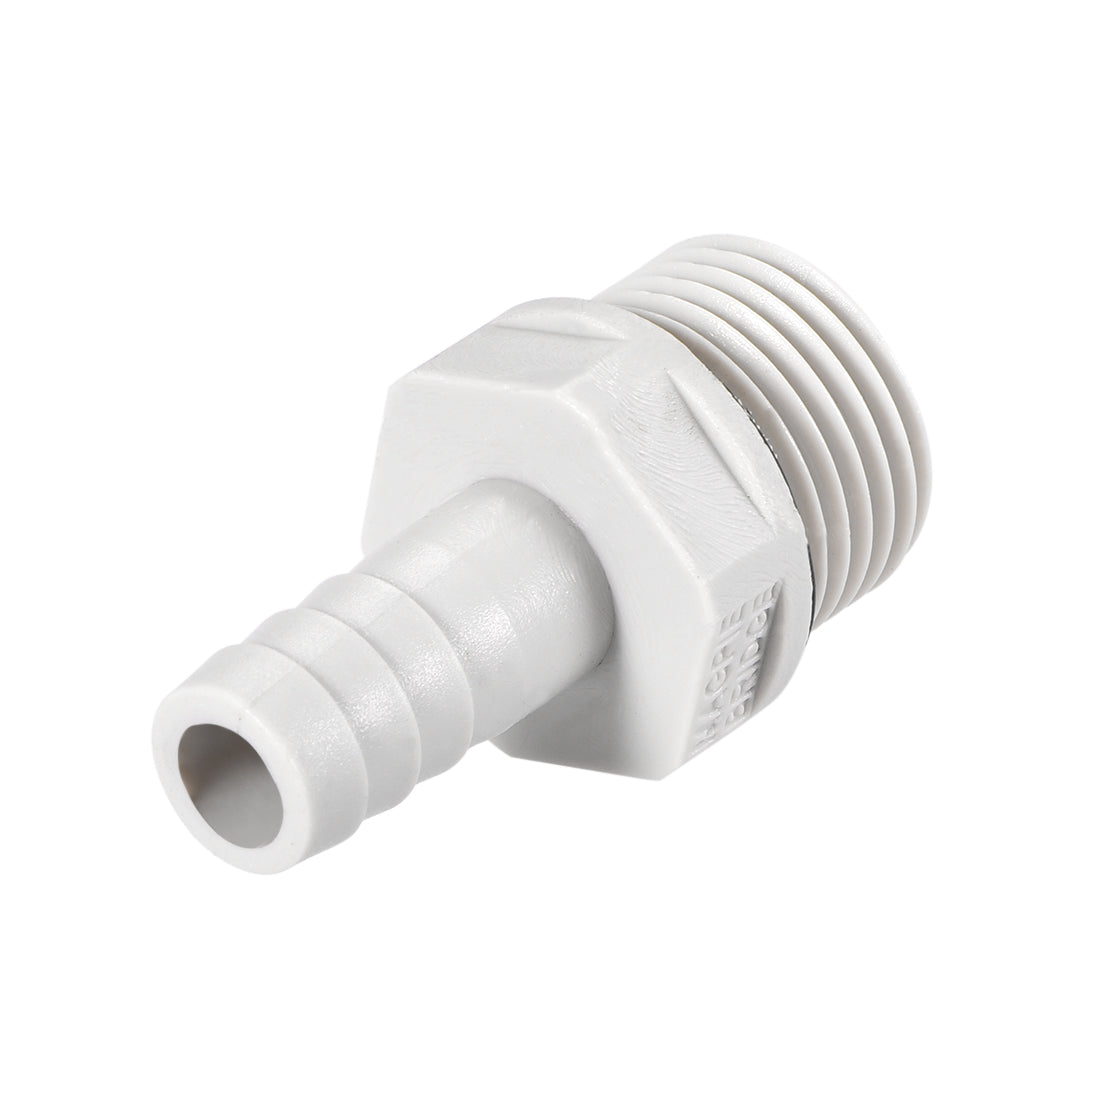 Uxcell Uxcell PVC Barb Hose Fitting Connector Adapter 6mm or 15/64" Barbed x 1/4" G Male Pipe 5pcs